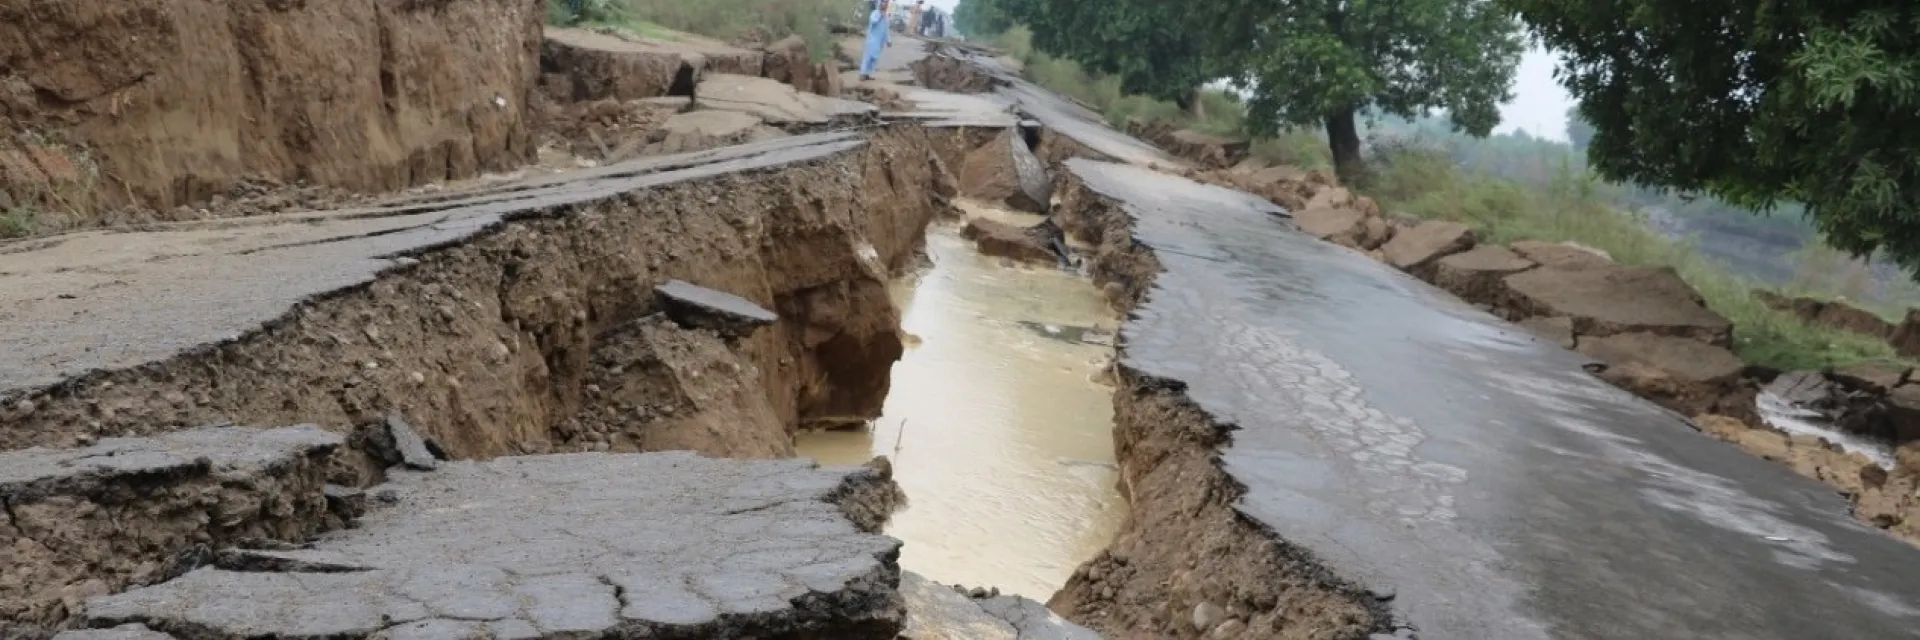 A road damaged by the earthquake